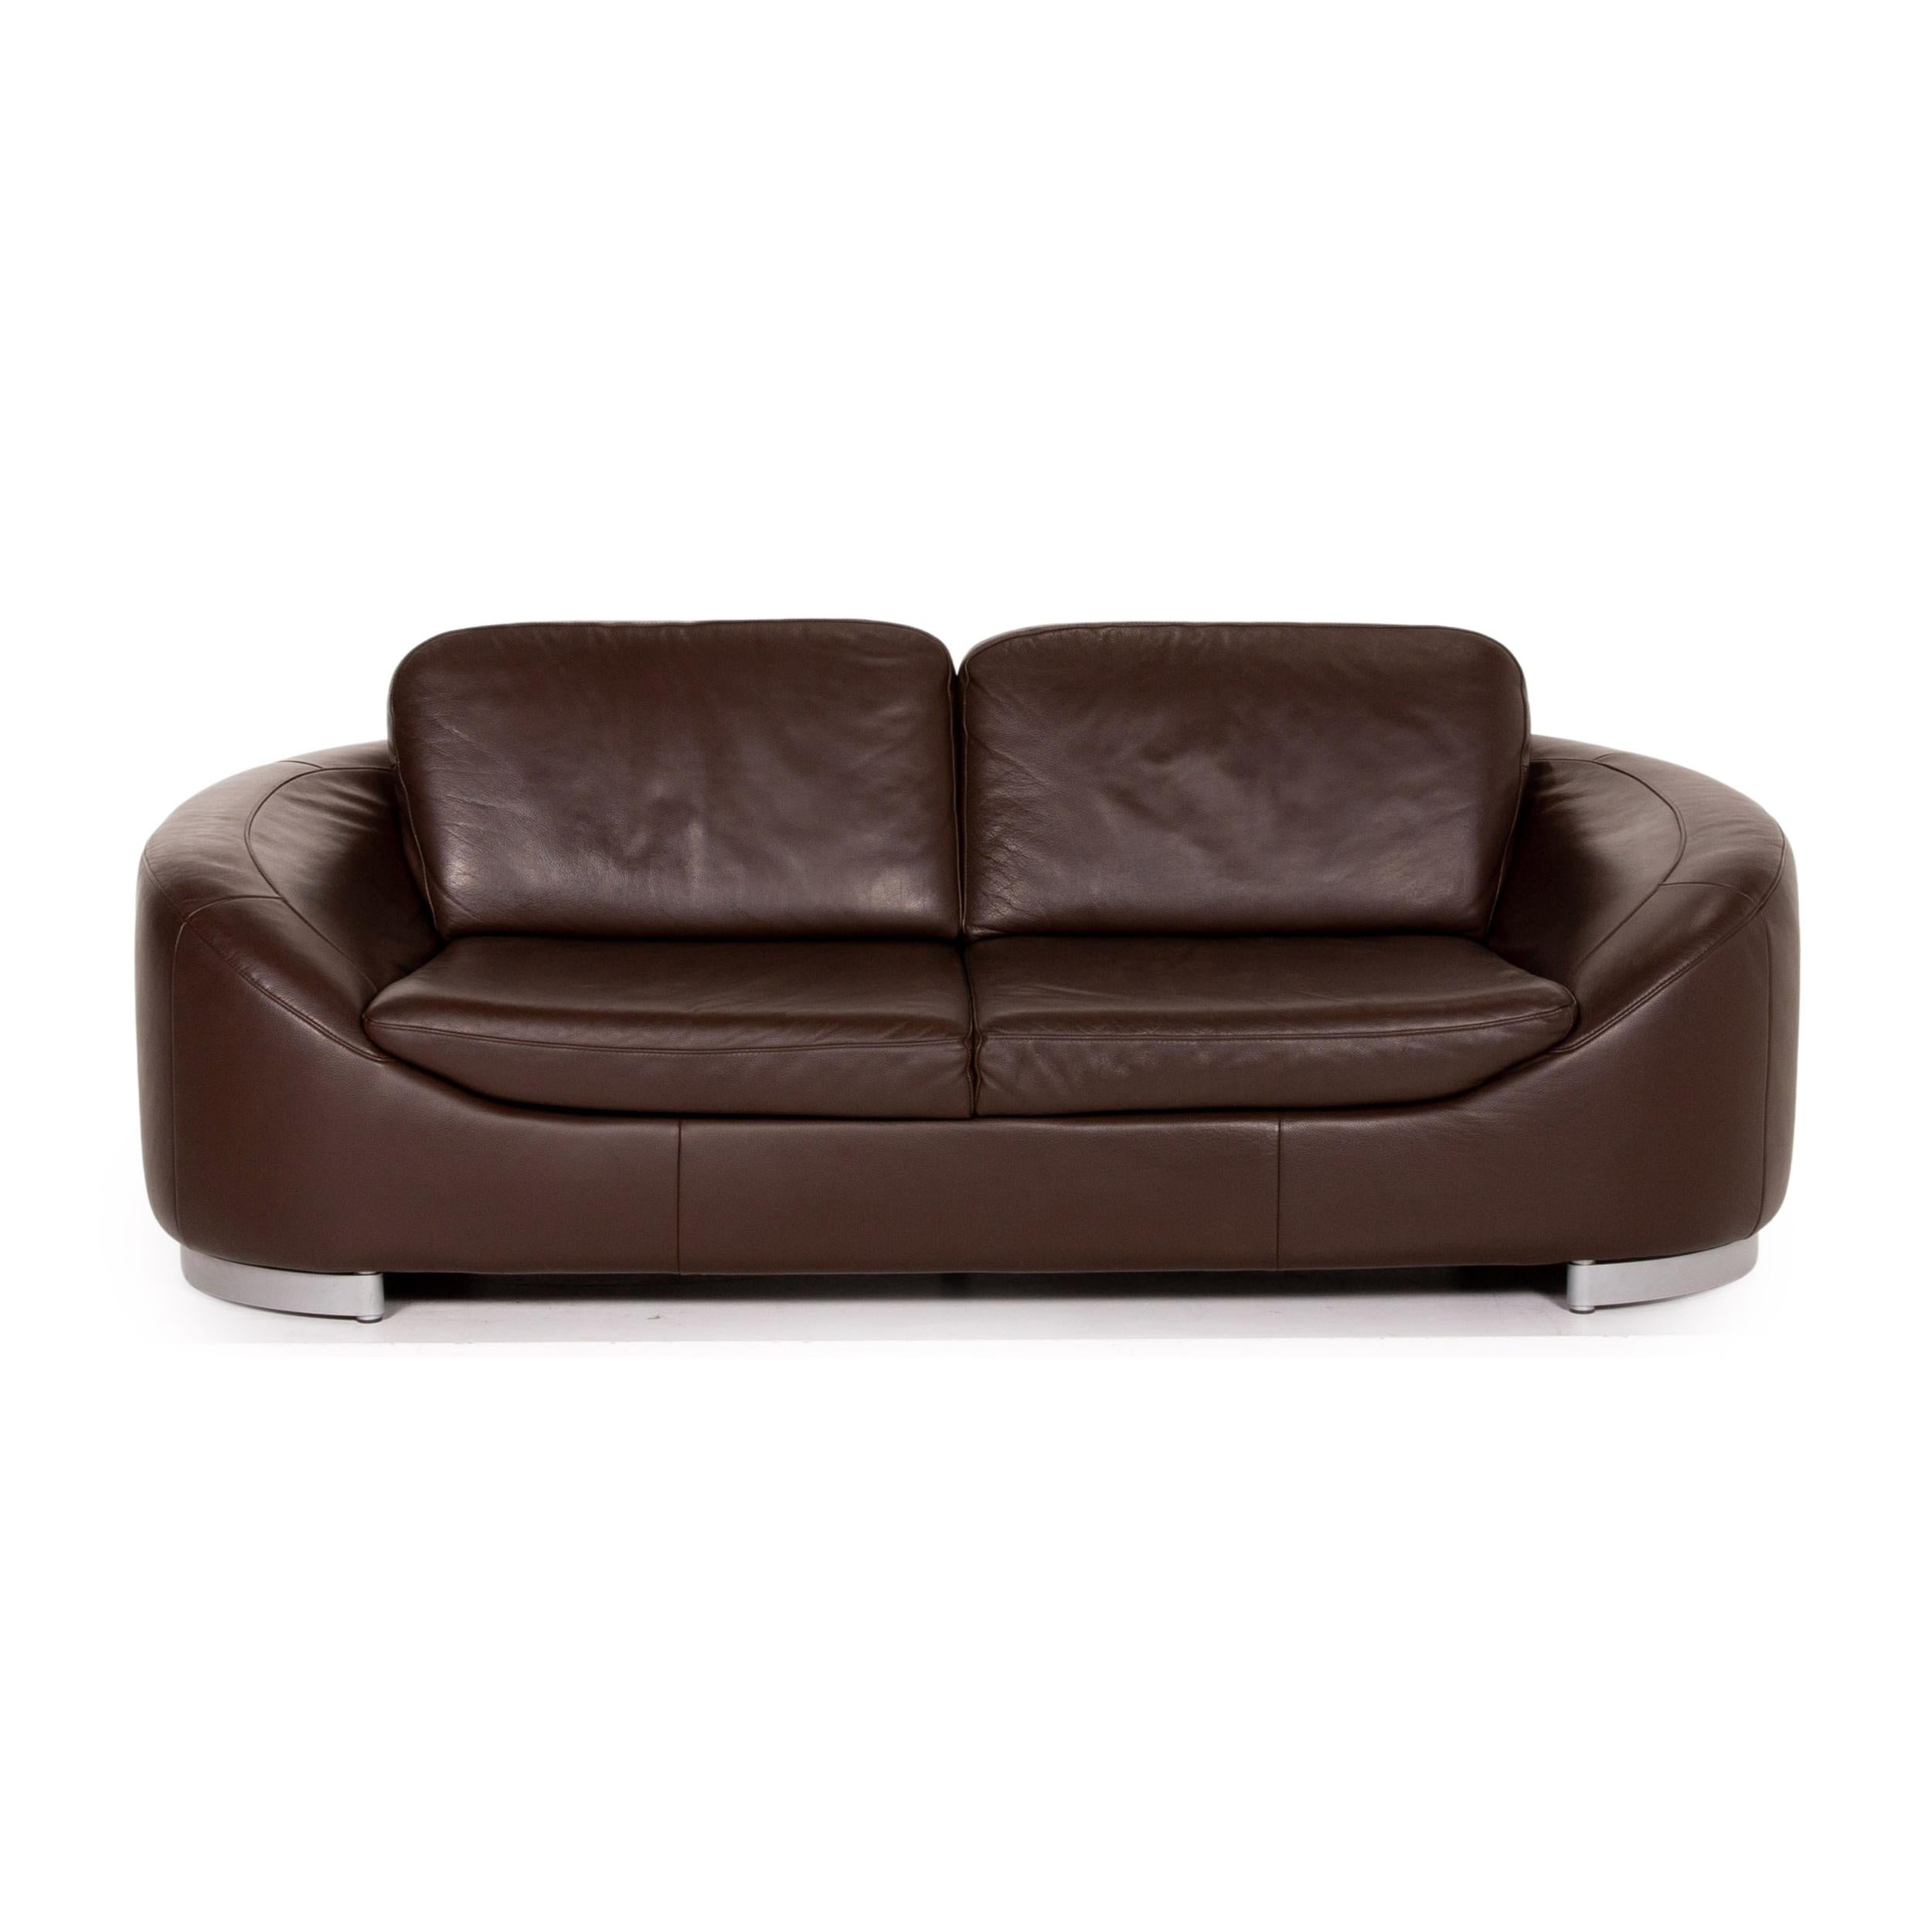 German Ewald Schillig Leather Sofa Set Brown Dark Brown 2x Two-Seater For Sale